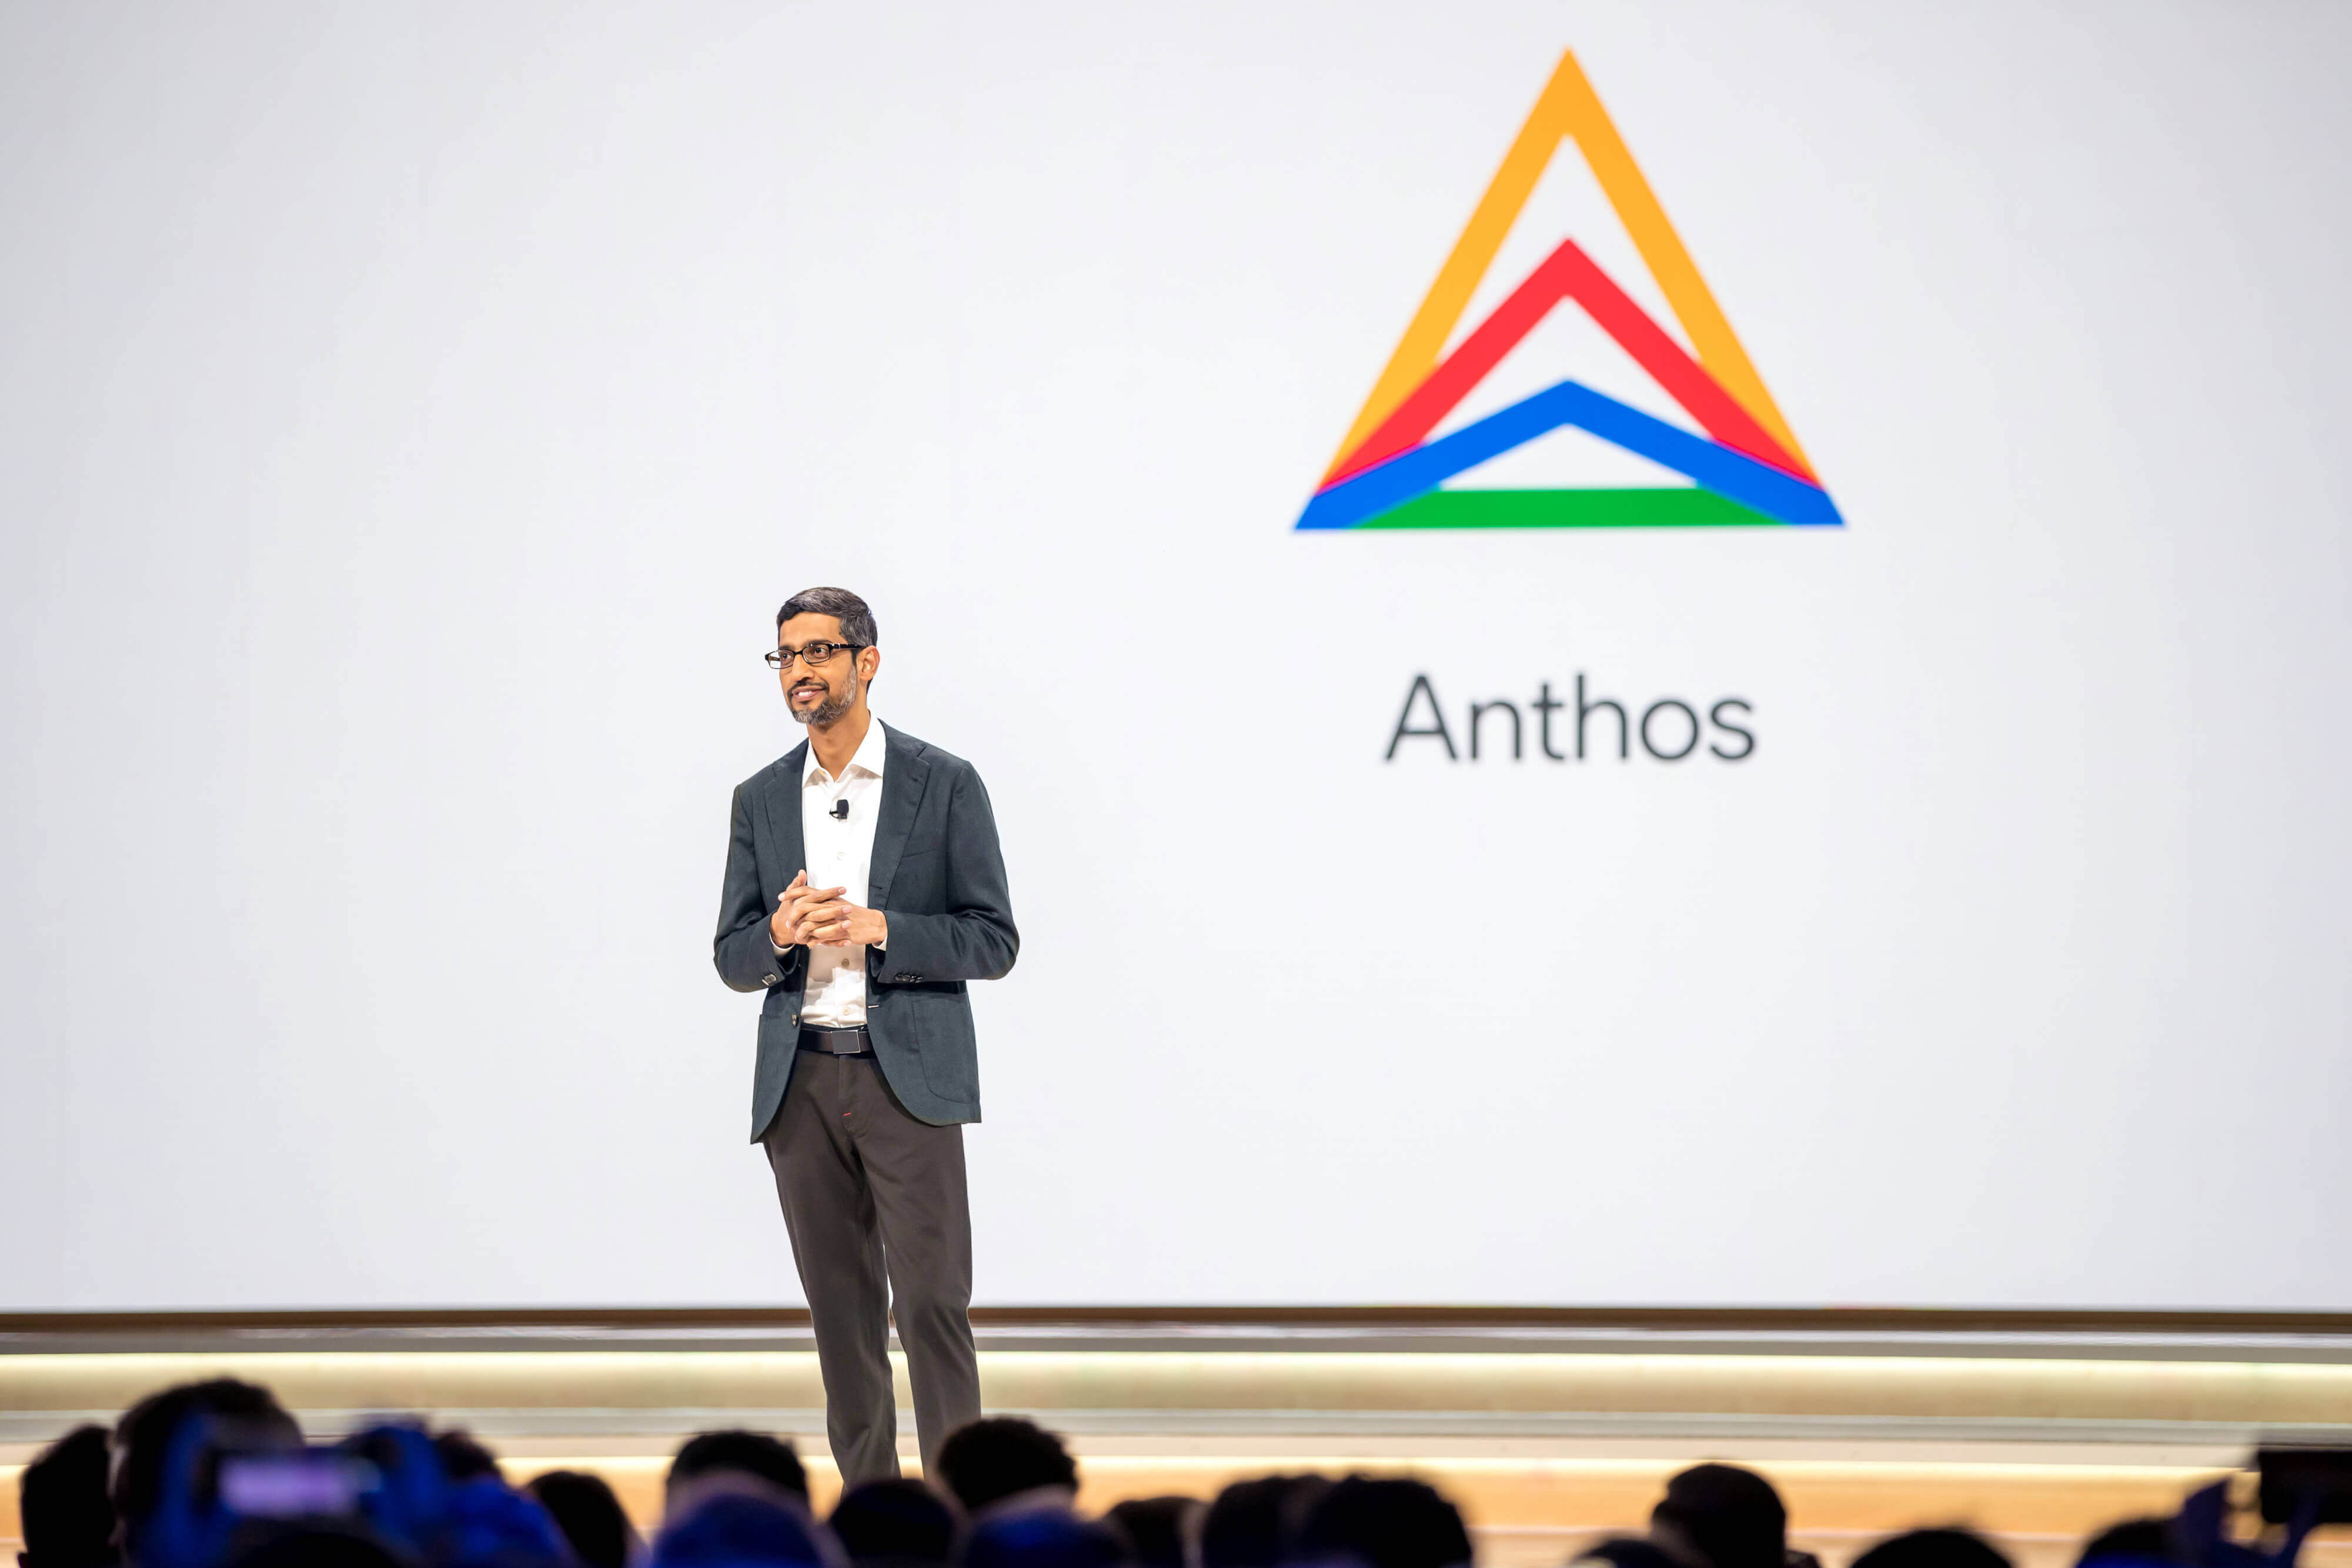 Google's parent company Alphabet sees revenue decline for the first time in 22 years